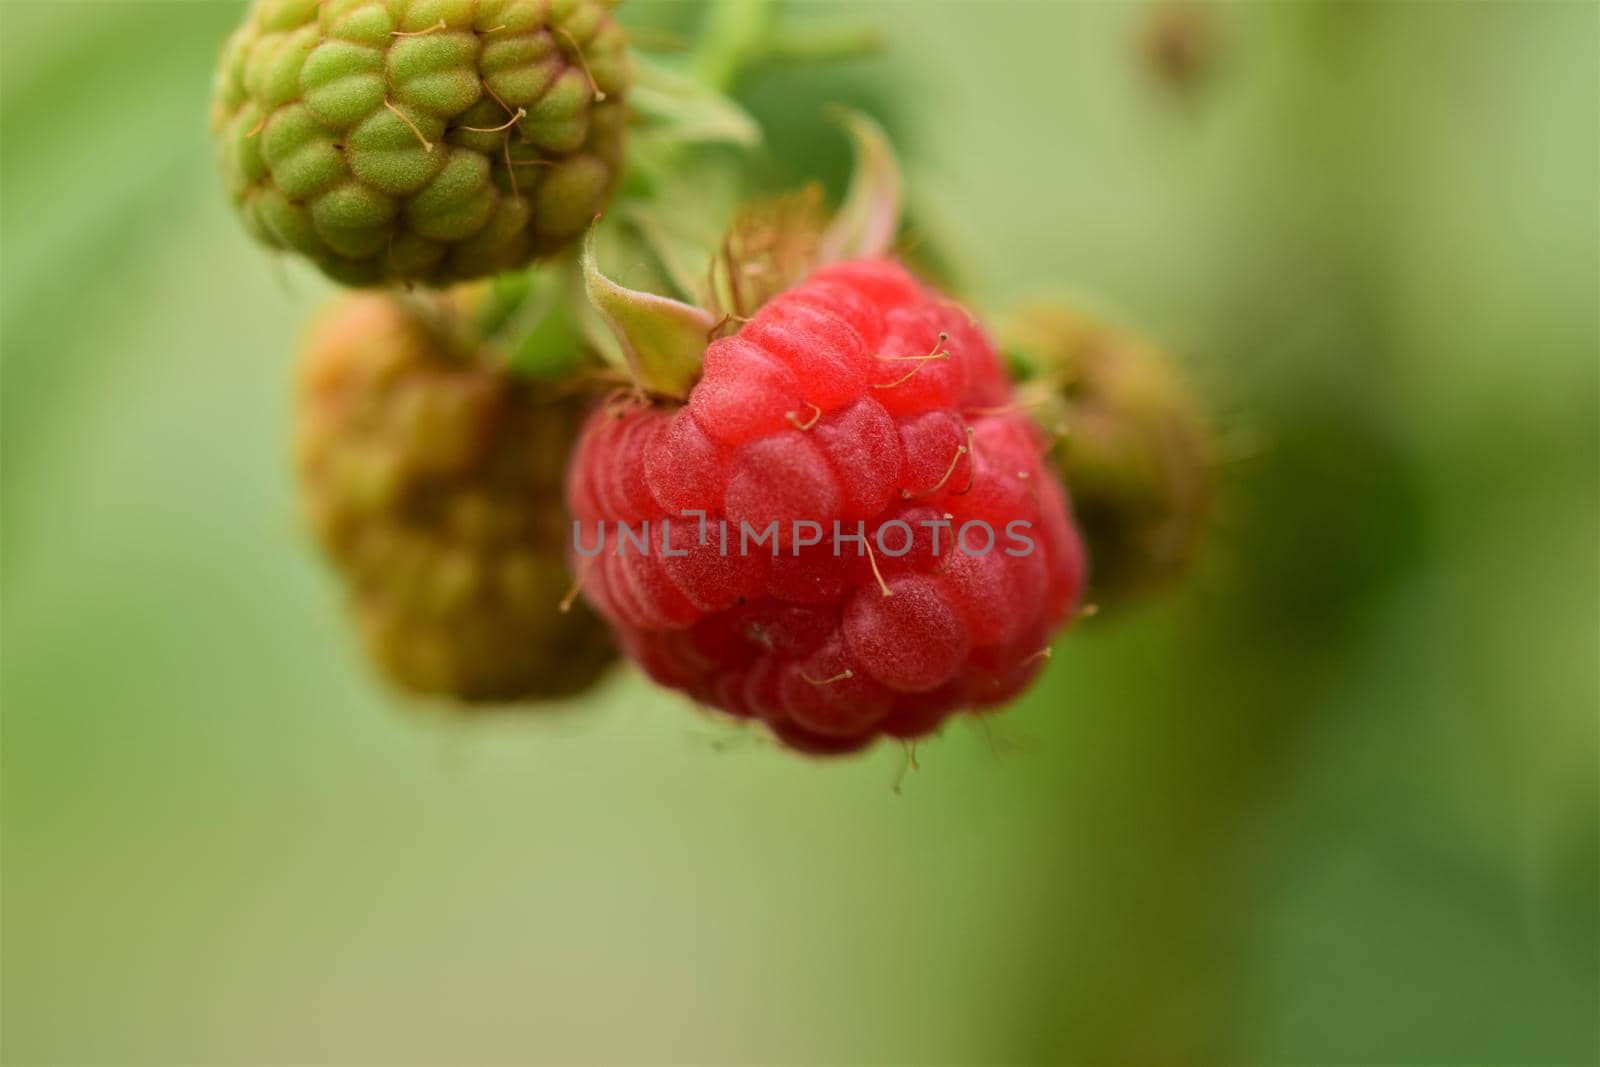 Ripe red raspberry and unripe green rashberries as a close-up